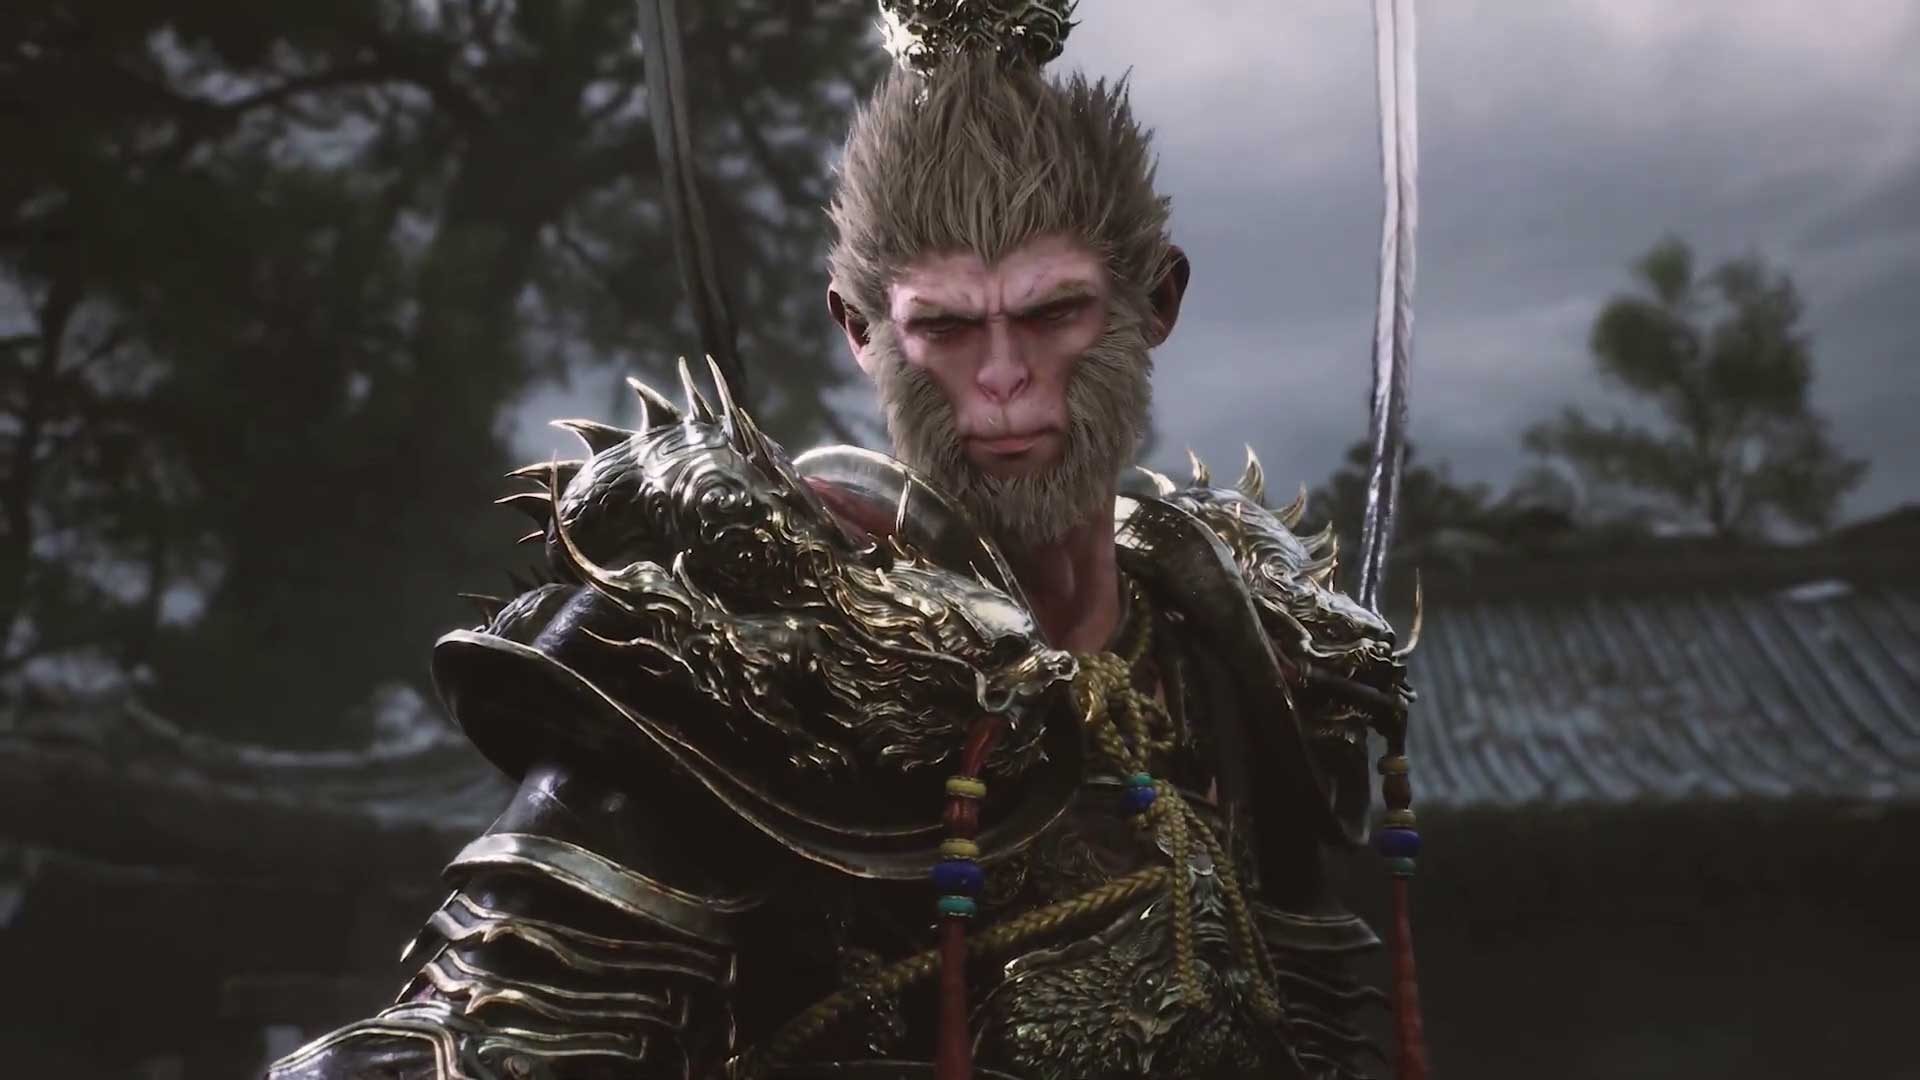 New Black Myth: Wukong Gameplay Trailer Showcases Spells, Bosses and More